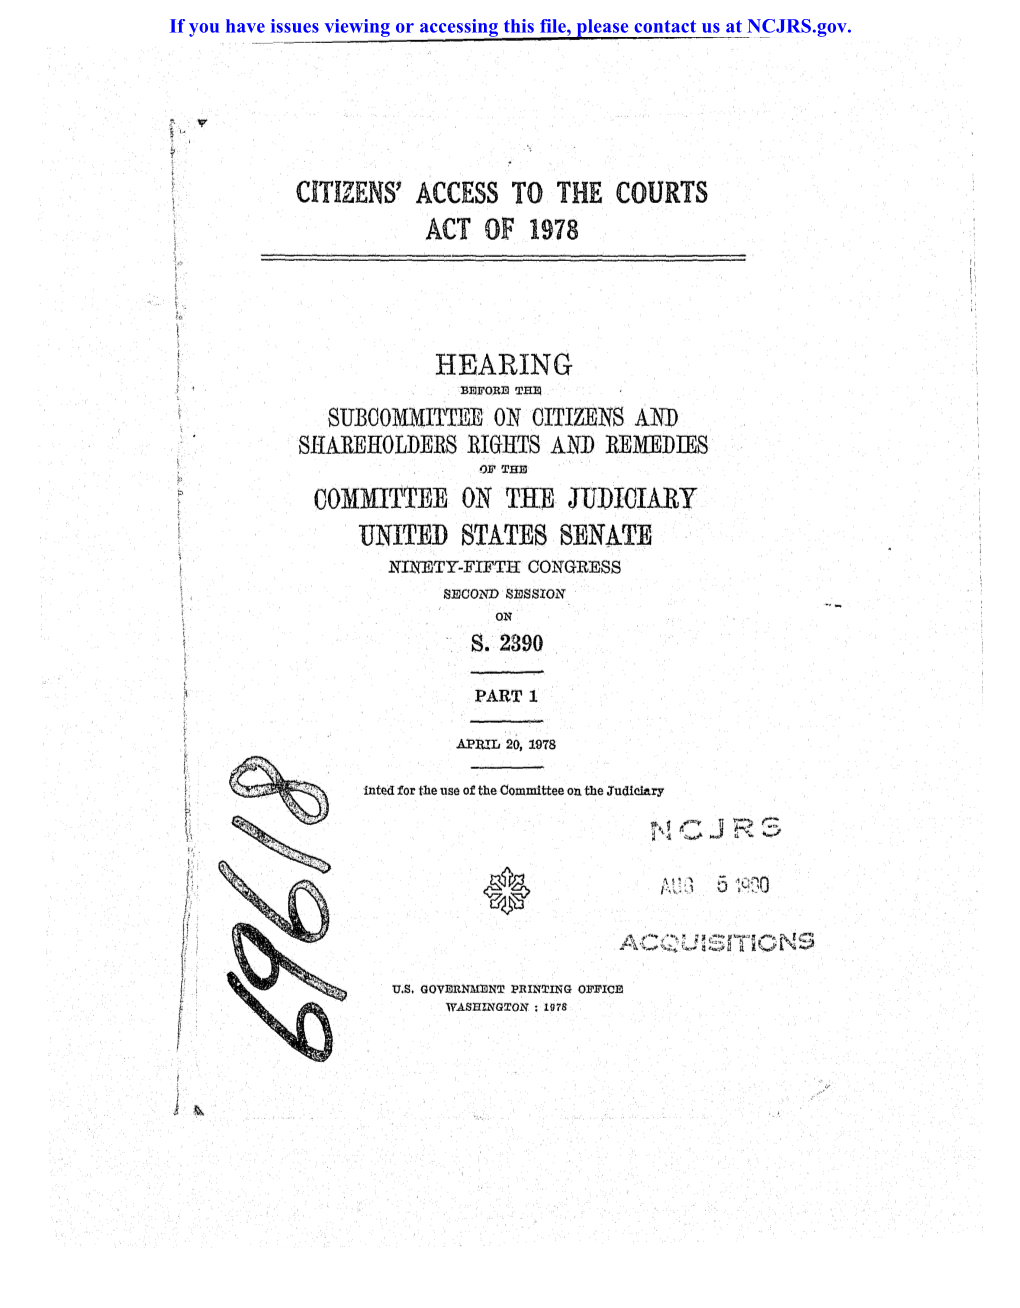 Citizens' Access to the Courts Act of 1978